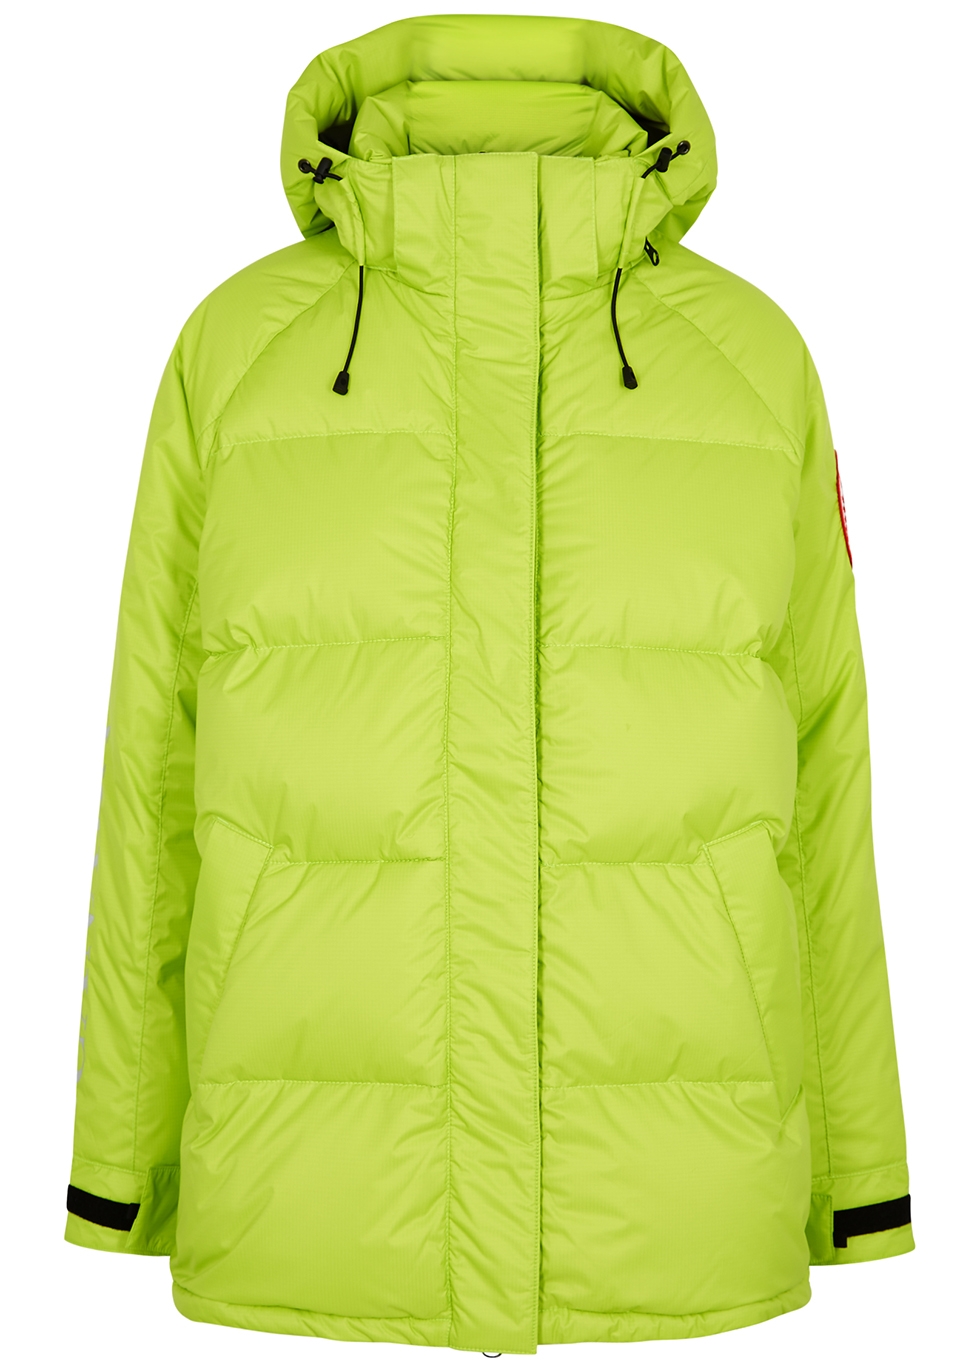 Approach bright green quilted shell jacket